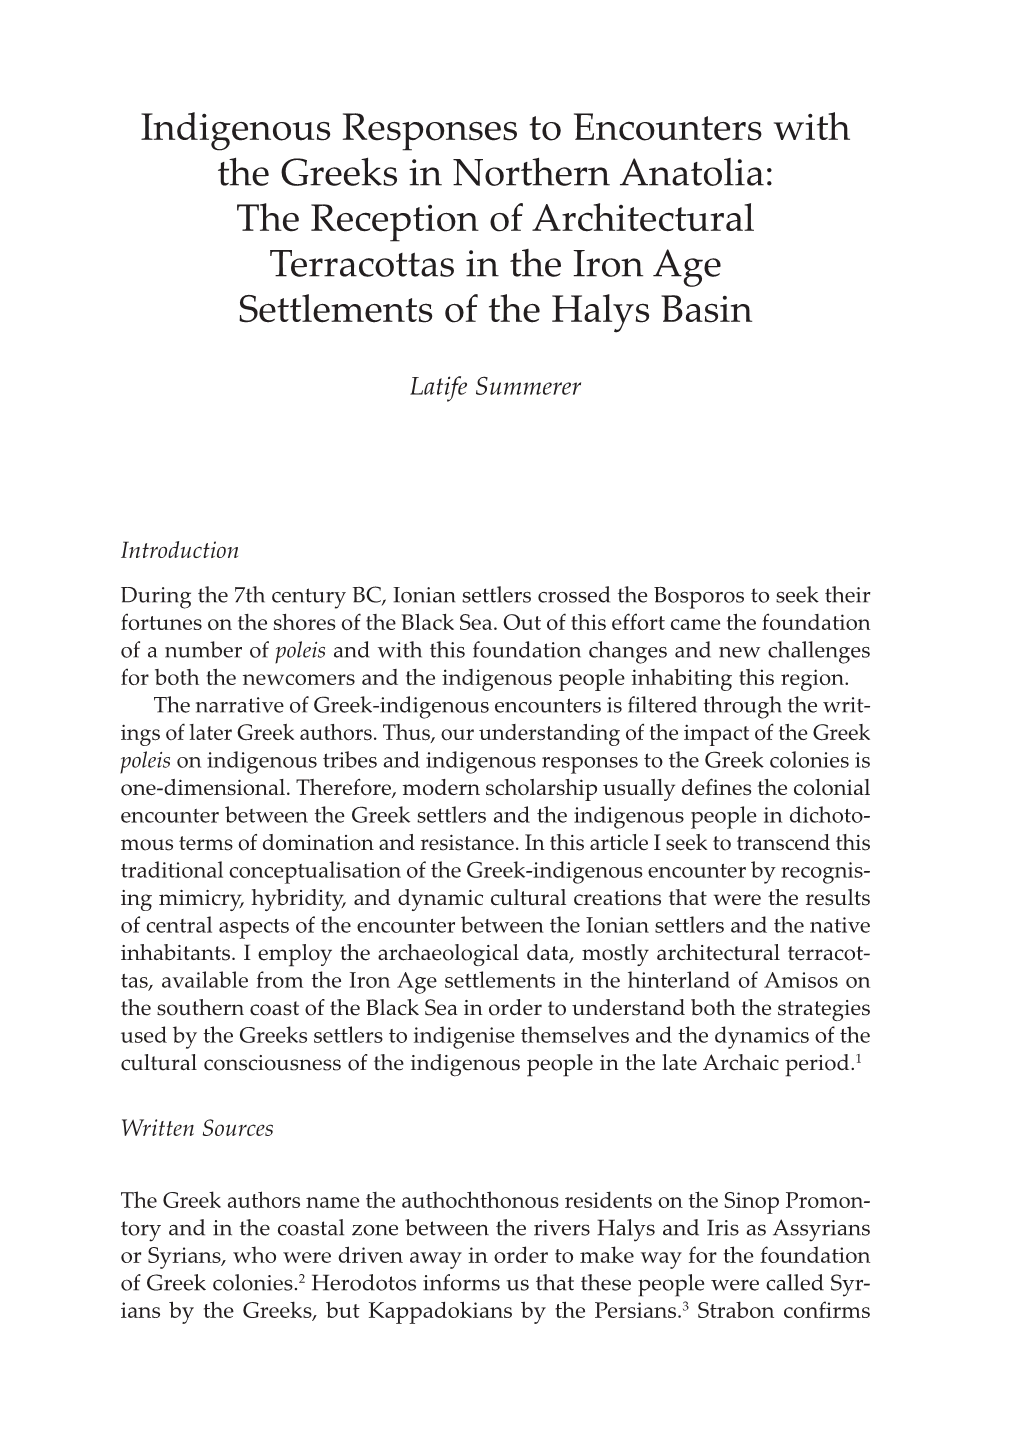 Indigenous Responses to Encounters with the Greeks in Northern Anatolia: the Reception of Architectural Terracottas in the Iron Age Settlements of the Halys Basin